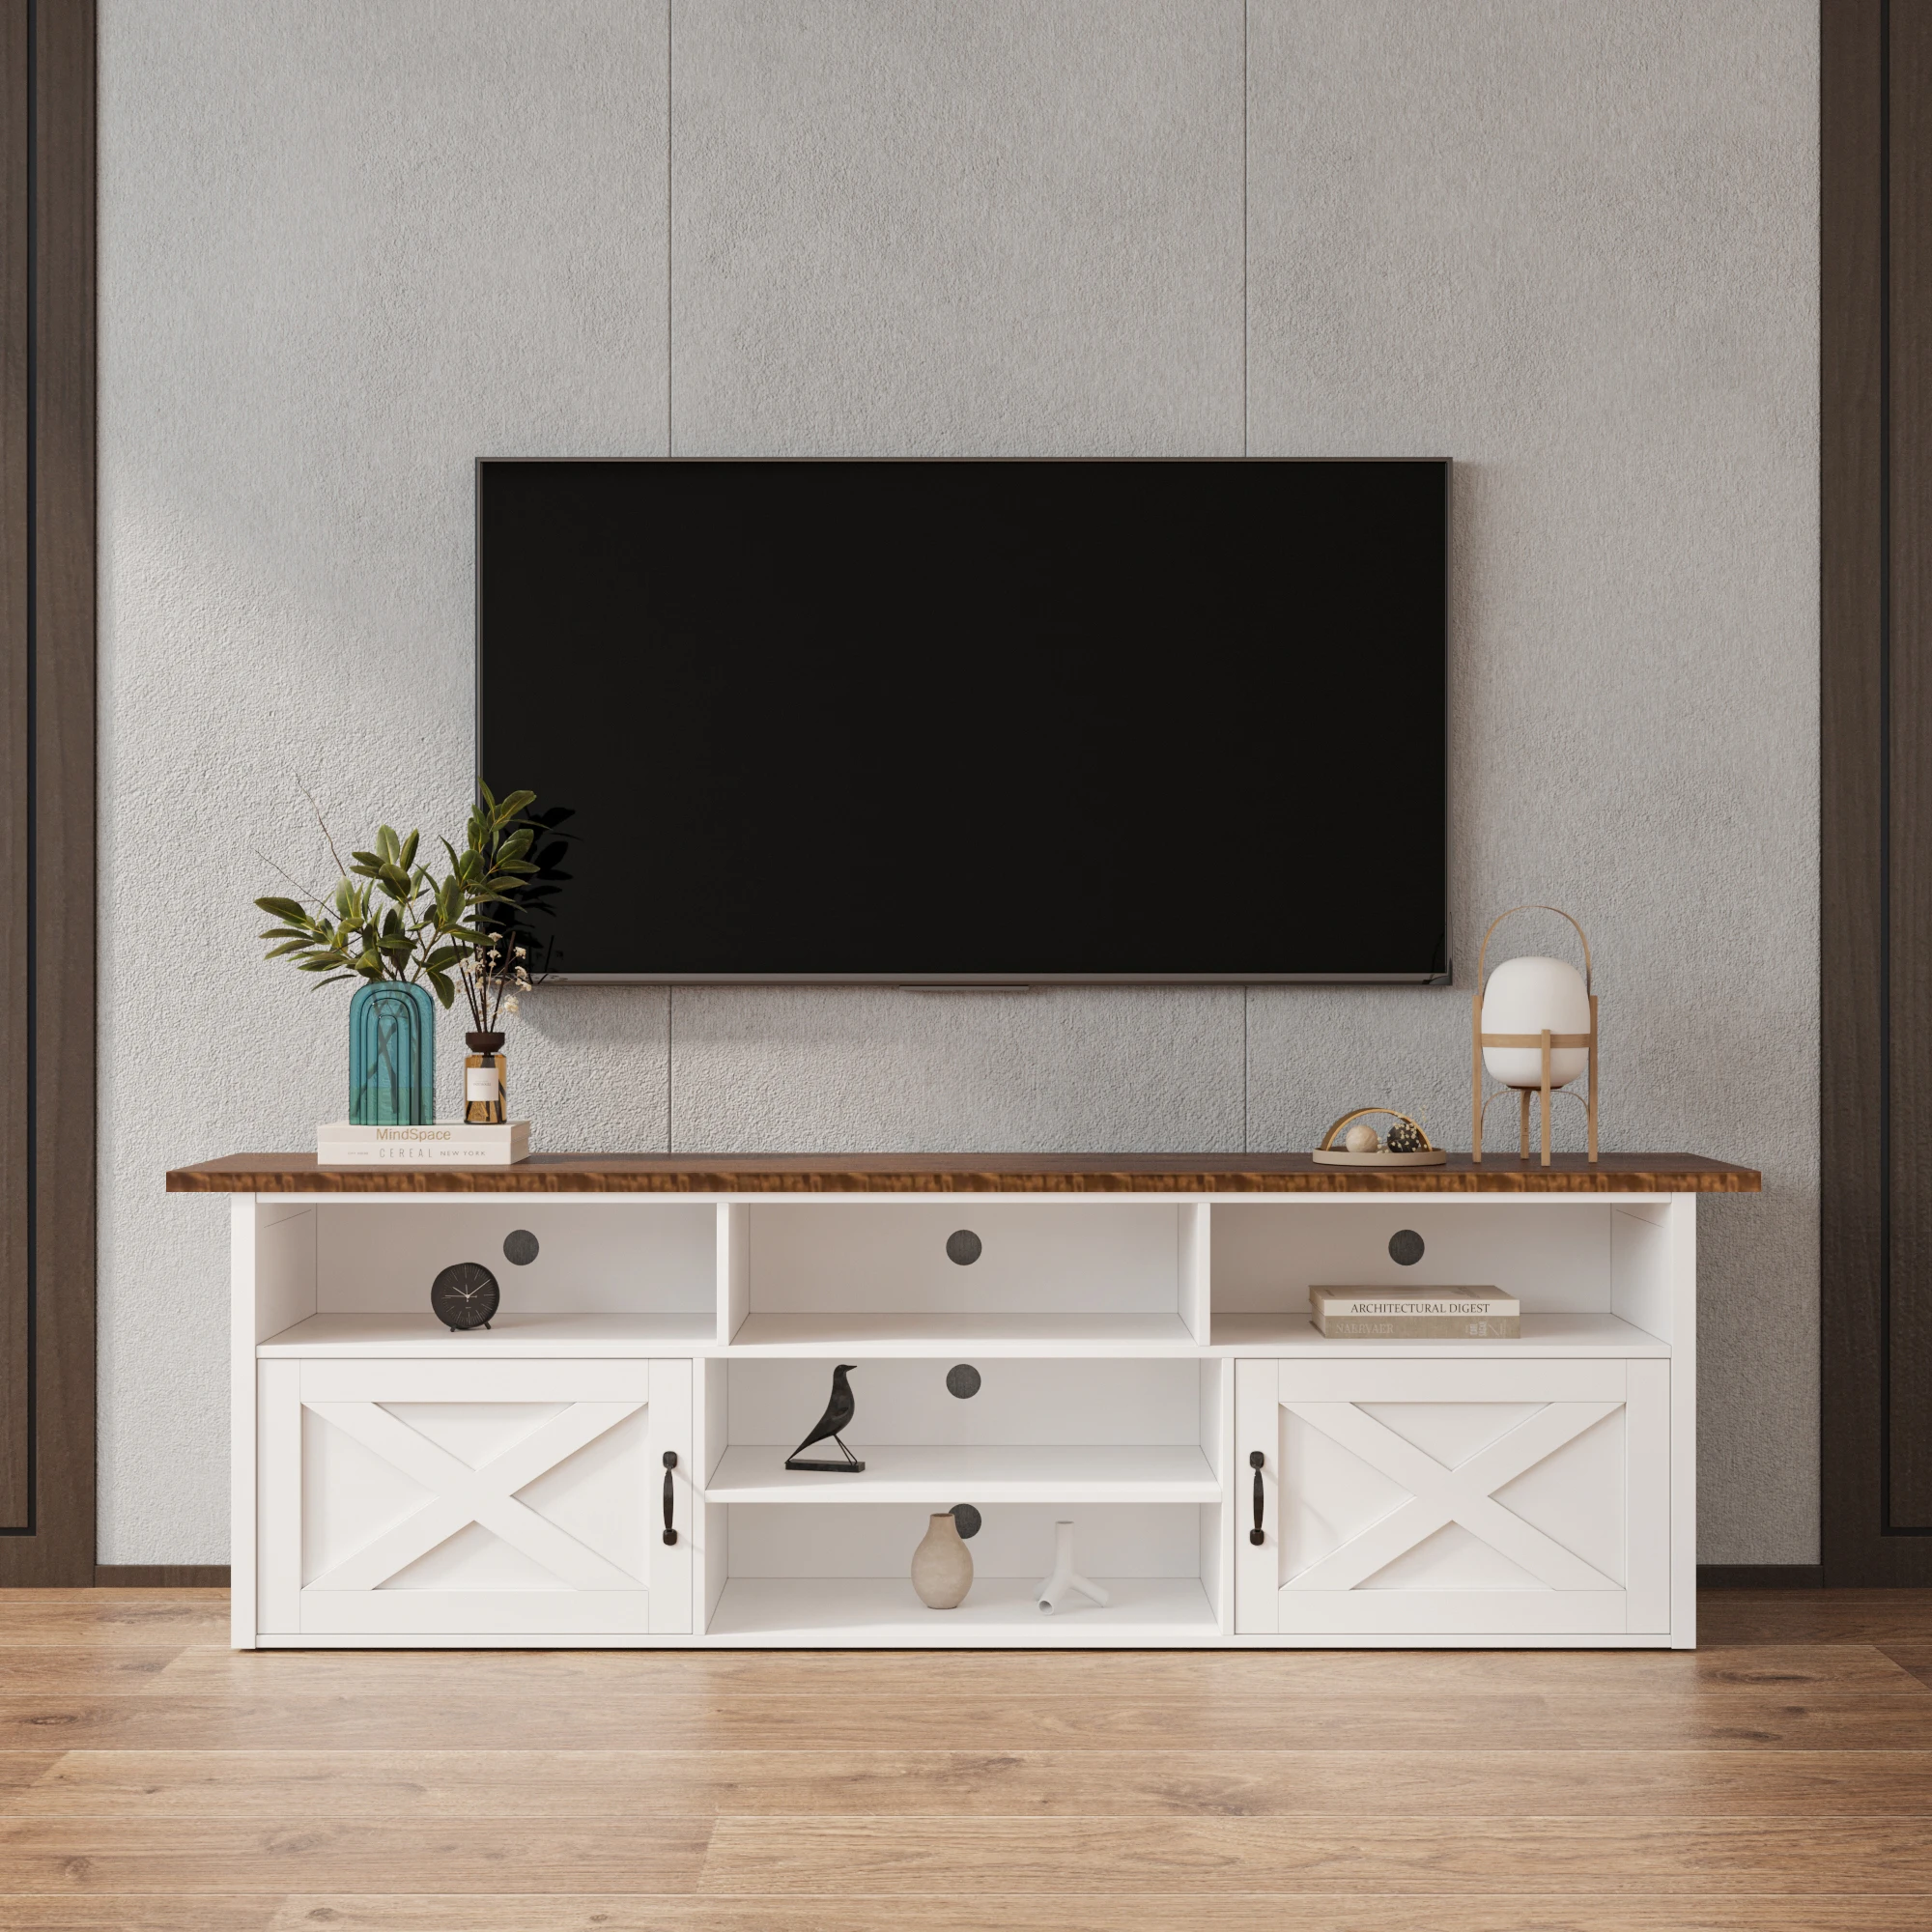 Modern Lcd Tv Stand With Tv Background Wall - Buy Tv Background Wall Design, Background Wall Tile,Wall Mount Lcd Tv Stand Product on 